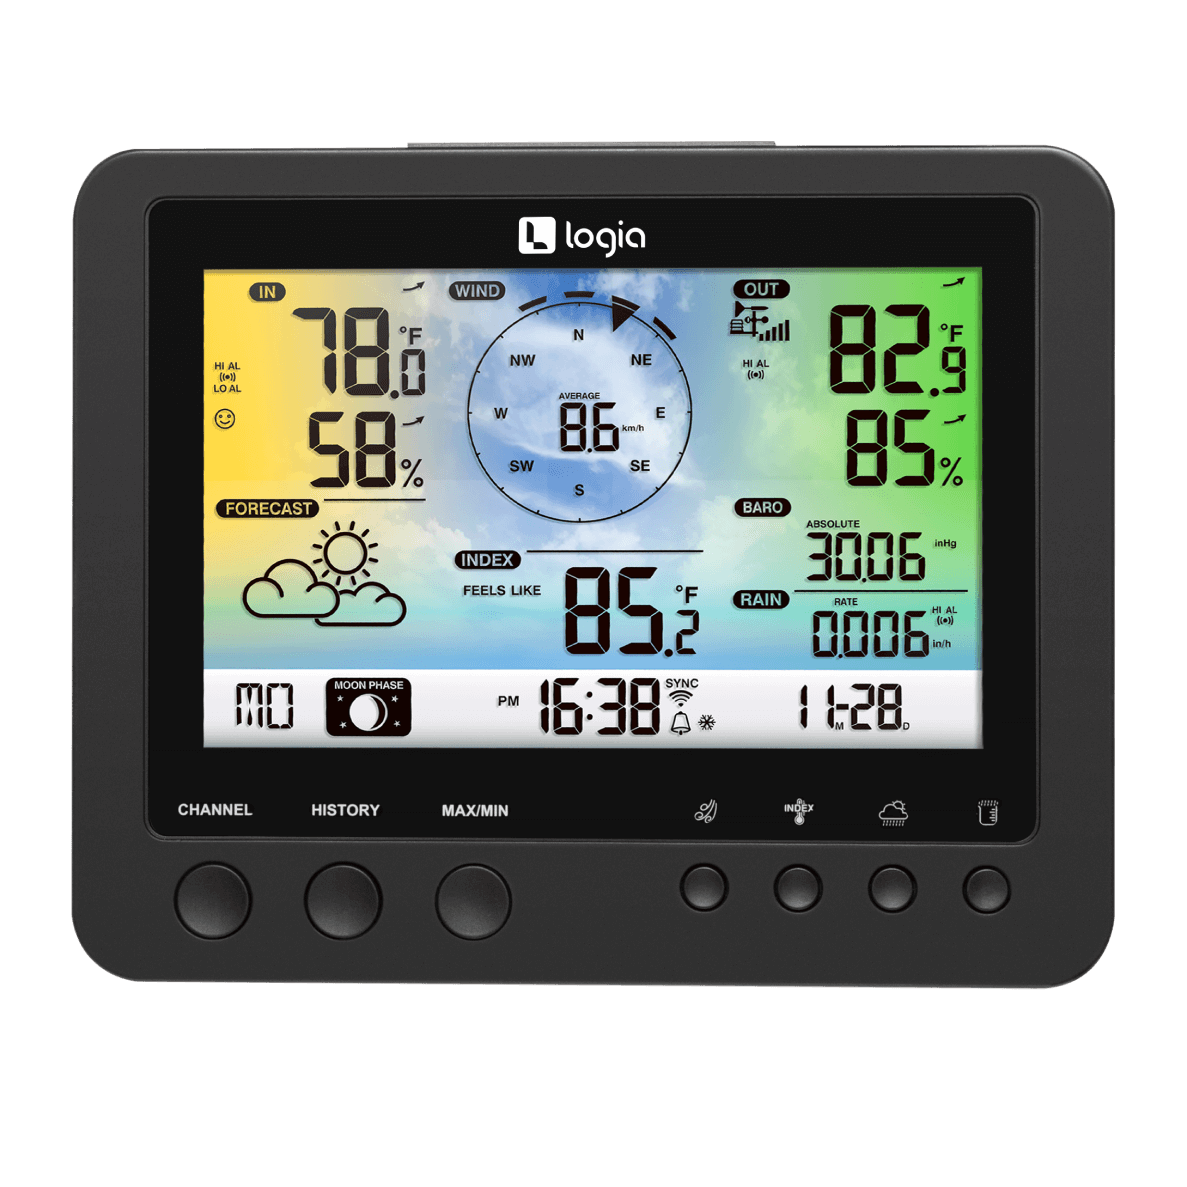 Professional WI-FI Weather Station with Wireless Outdoor Sensor, Color LCD  Display with APP Data Logging and Alerts, Rain Gauge, Wind Speed, Indoor